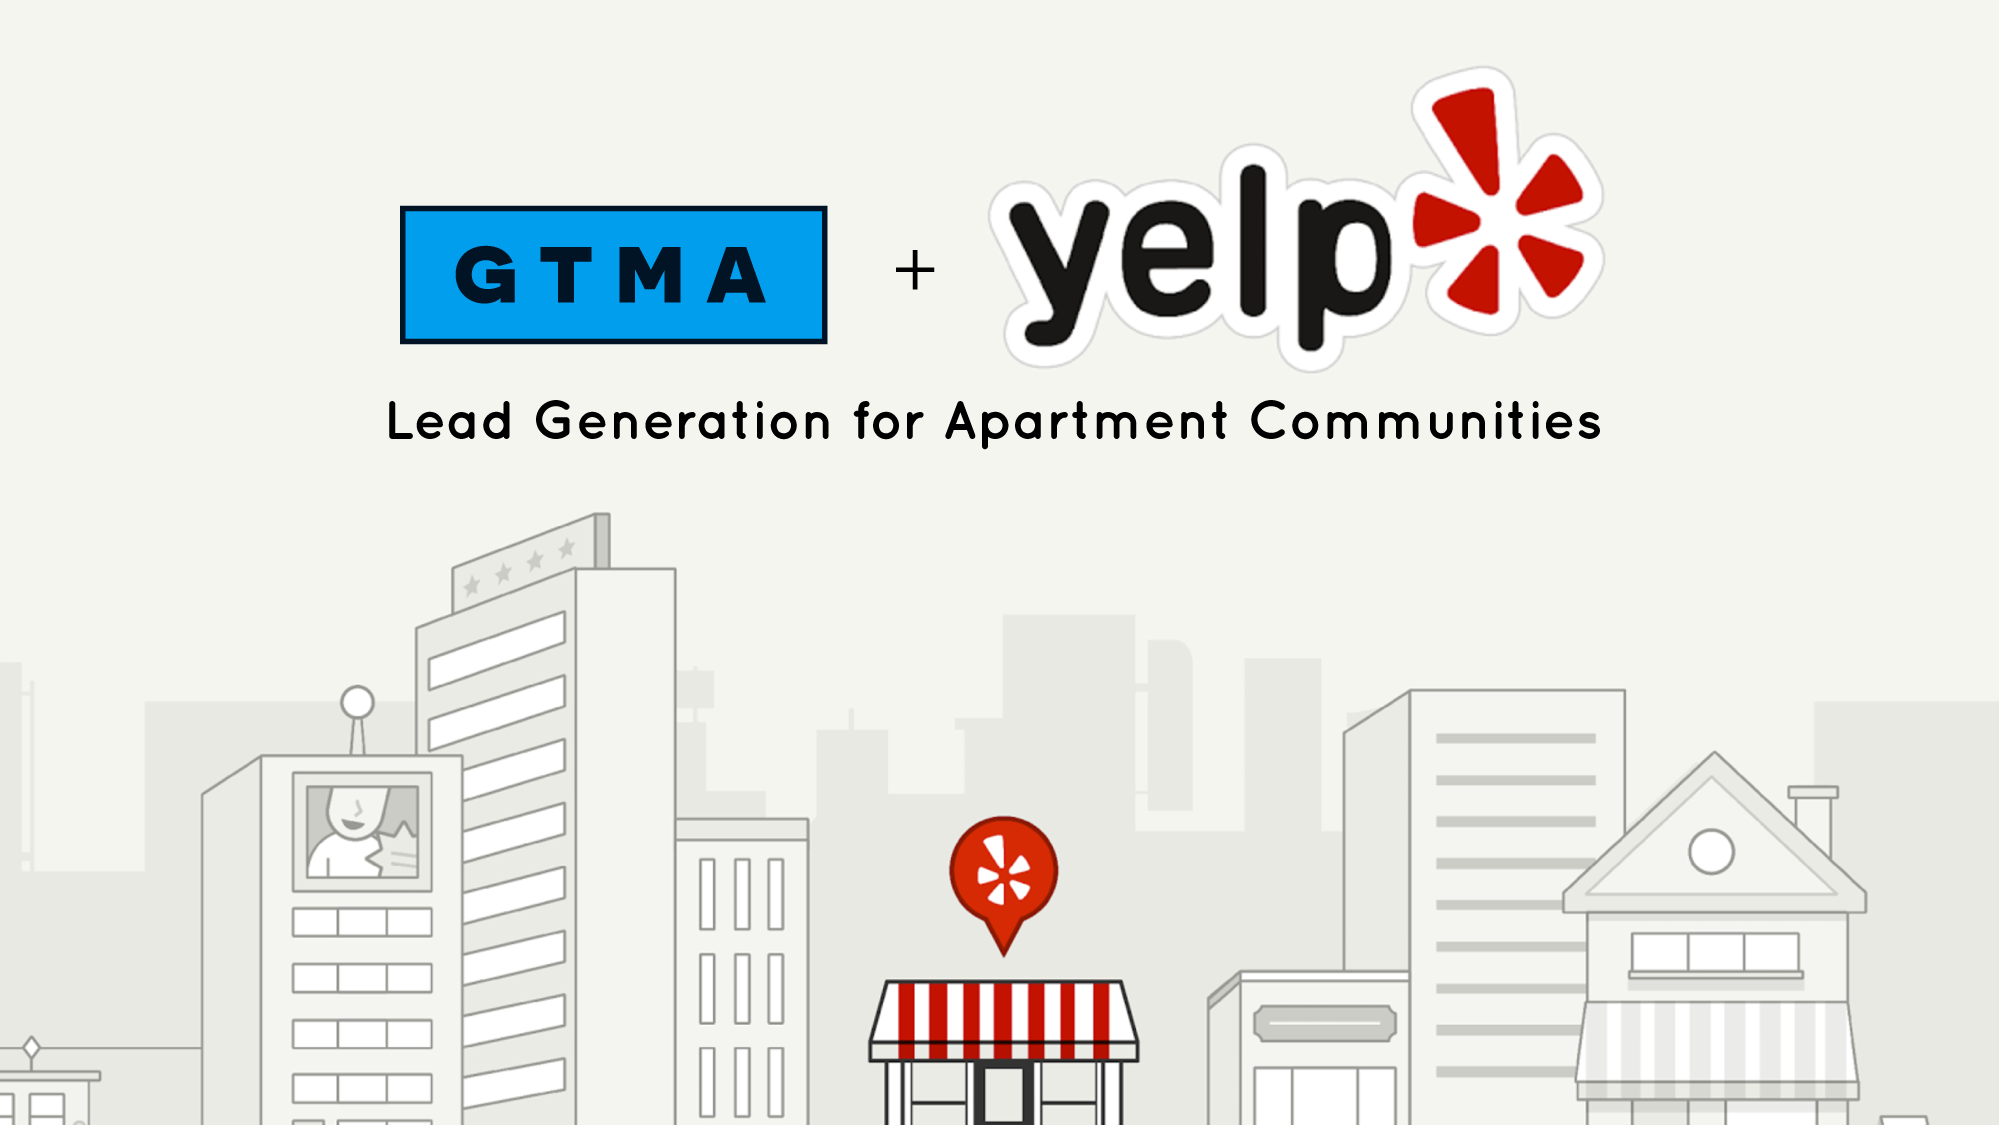 GTMA + Yelp’s Lead Generation for Apartment Communities